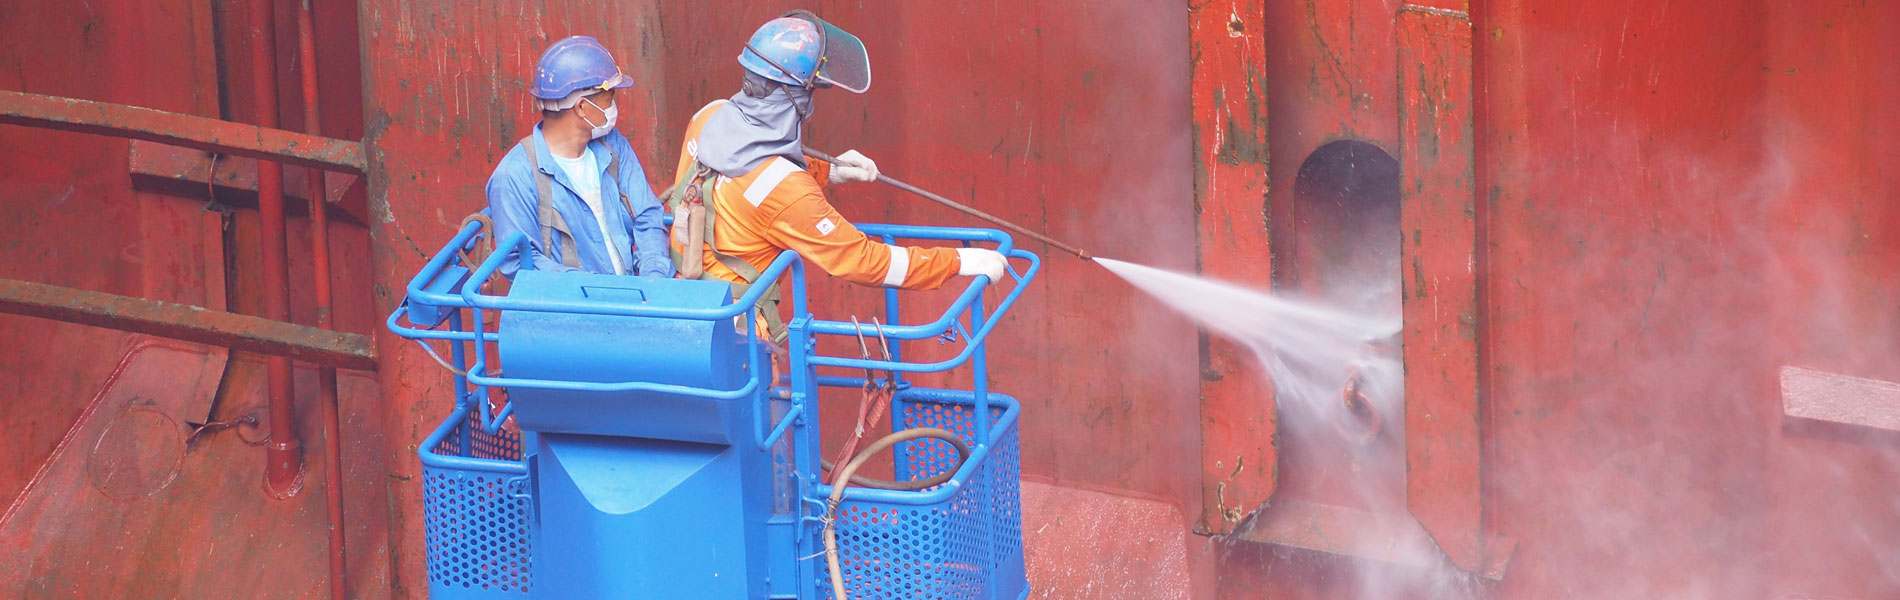 Blasting and Painting Services in Saudi Arabia